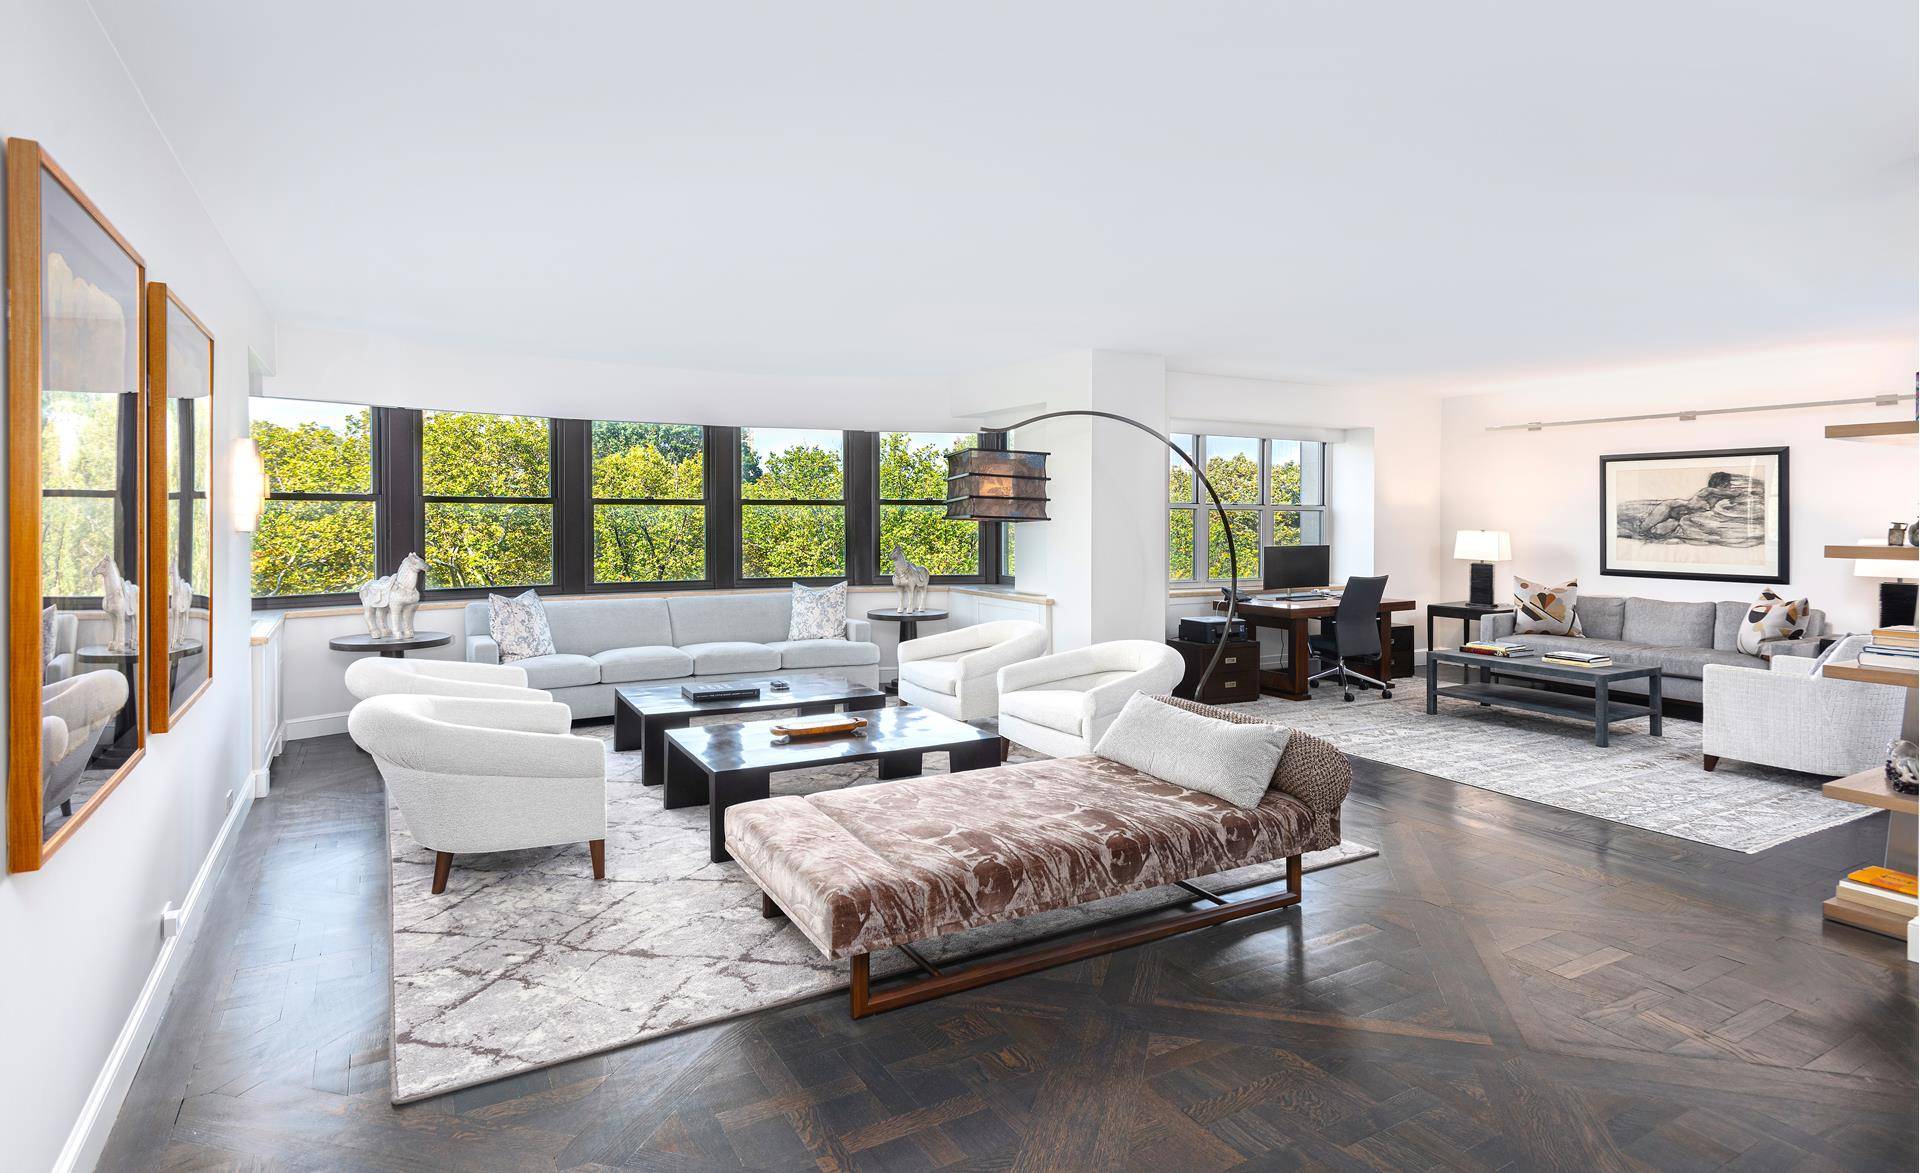 Spectacular, refined and enormously welcoming, don't miss this incredible opportunity with 43 feet ft of direct Central Park views !